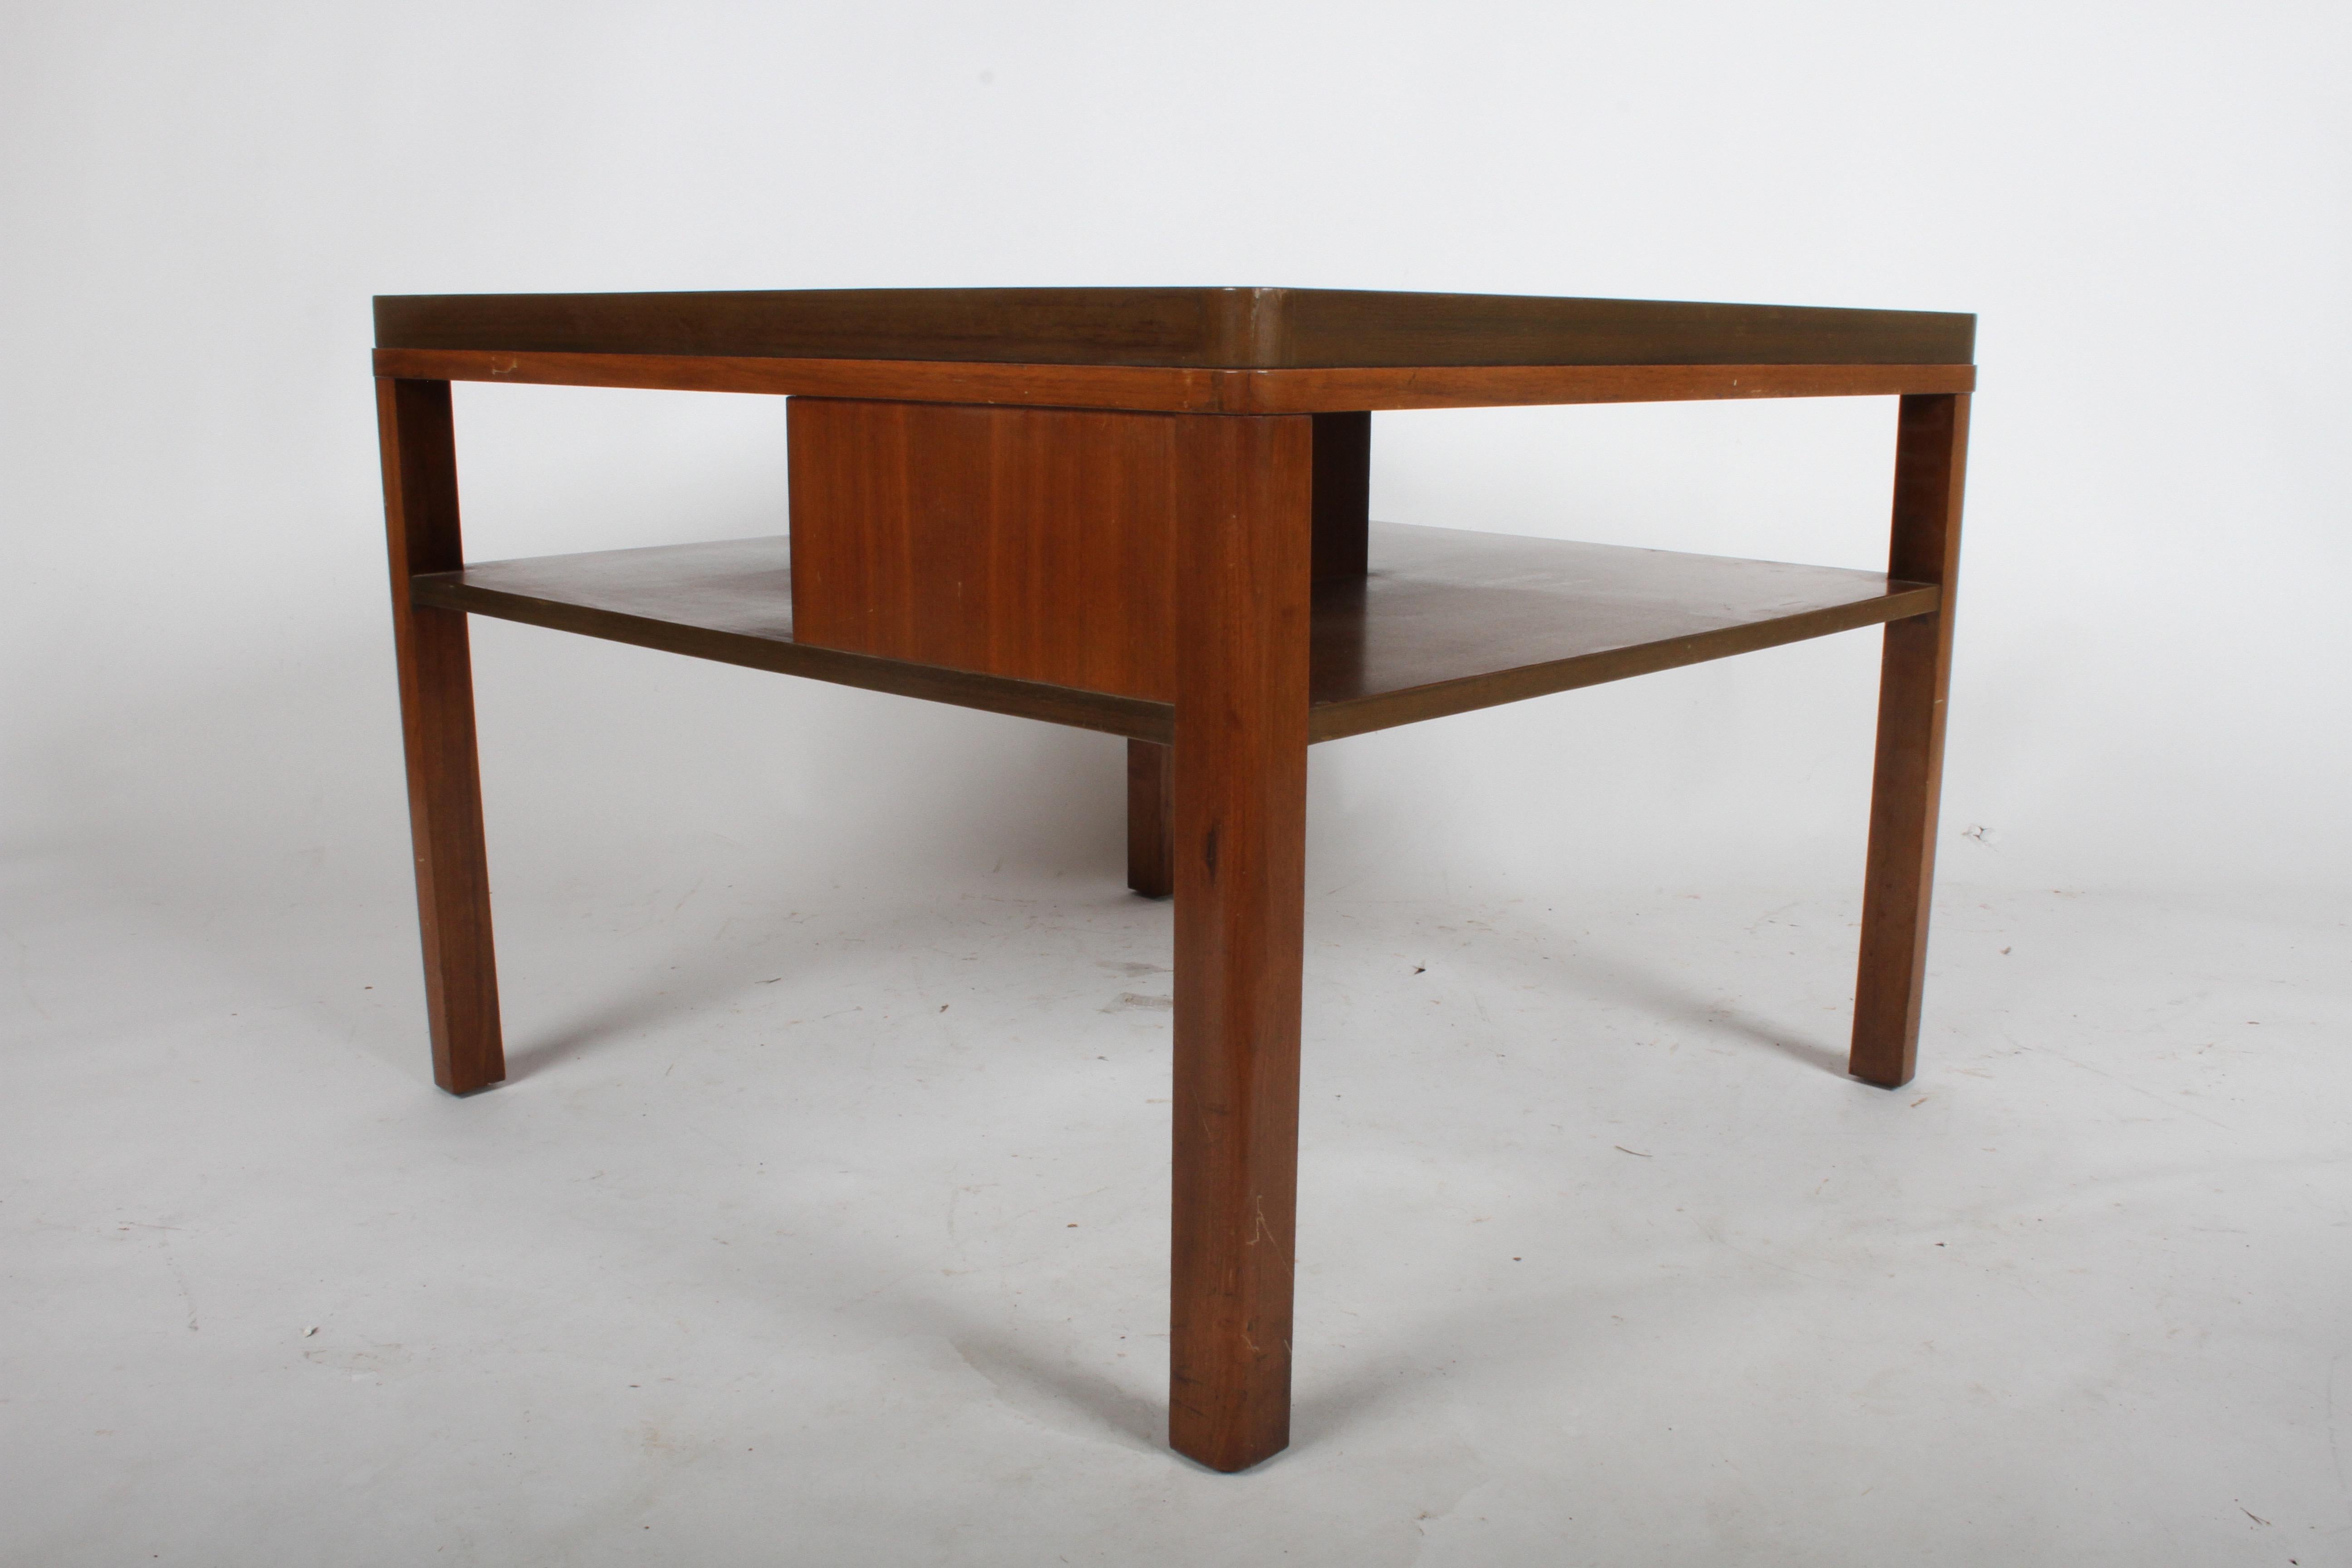 From the 1940s Dunbar Enduring Modern catalog is model # 2193, a single large end table with lower tier bookshelf by Edward J. Wormley. Rounded legs, has divider in center to hold books in place. Original Mahogany frame to be refinished prior to